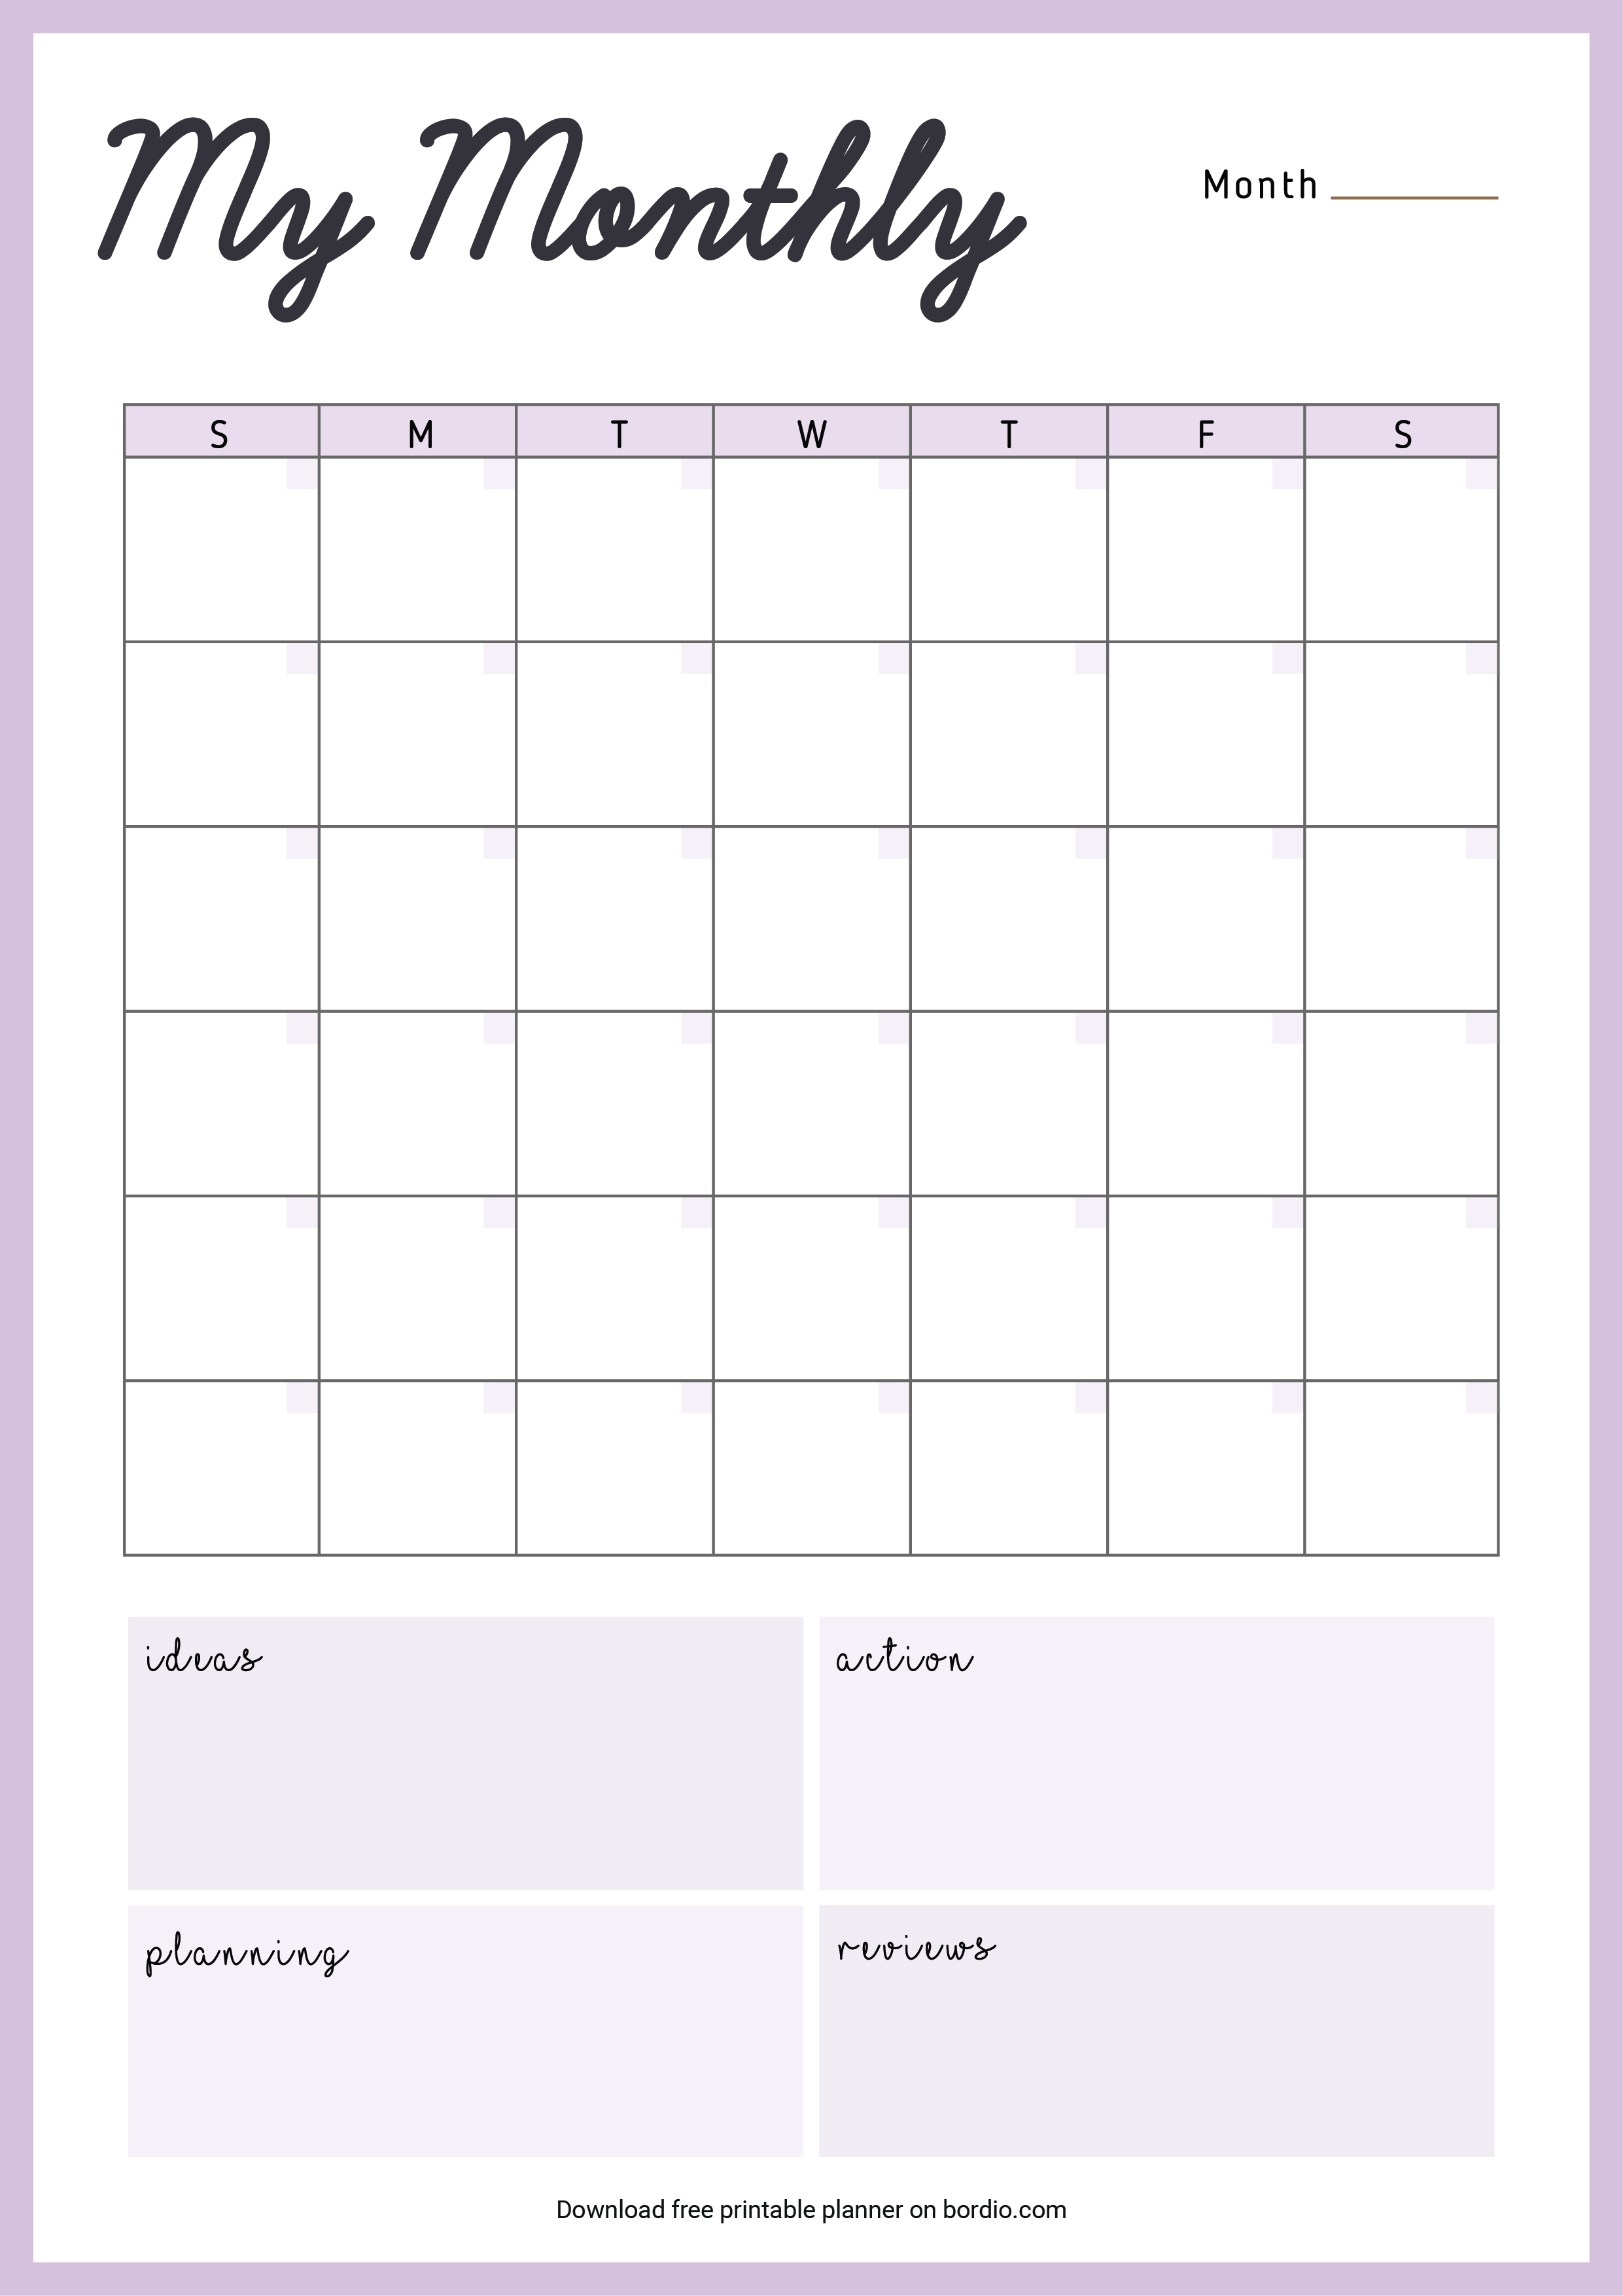 Printable Monthly Planner Templates Download For Free In Pdf 2920